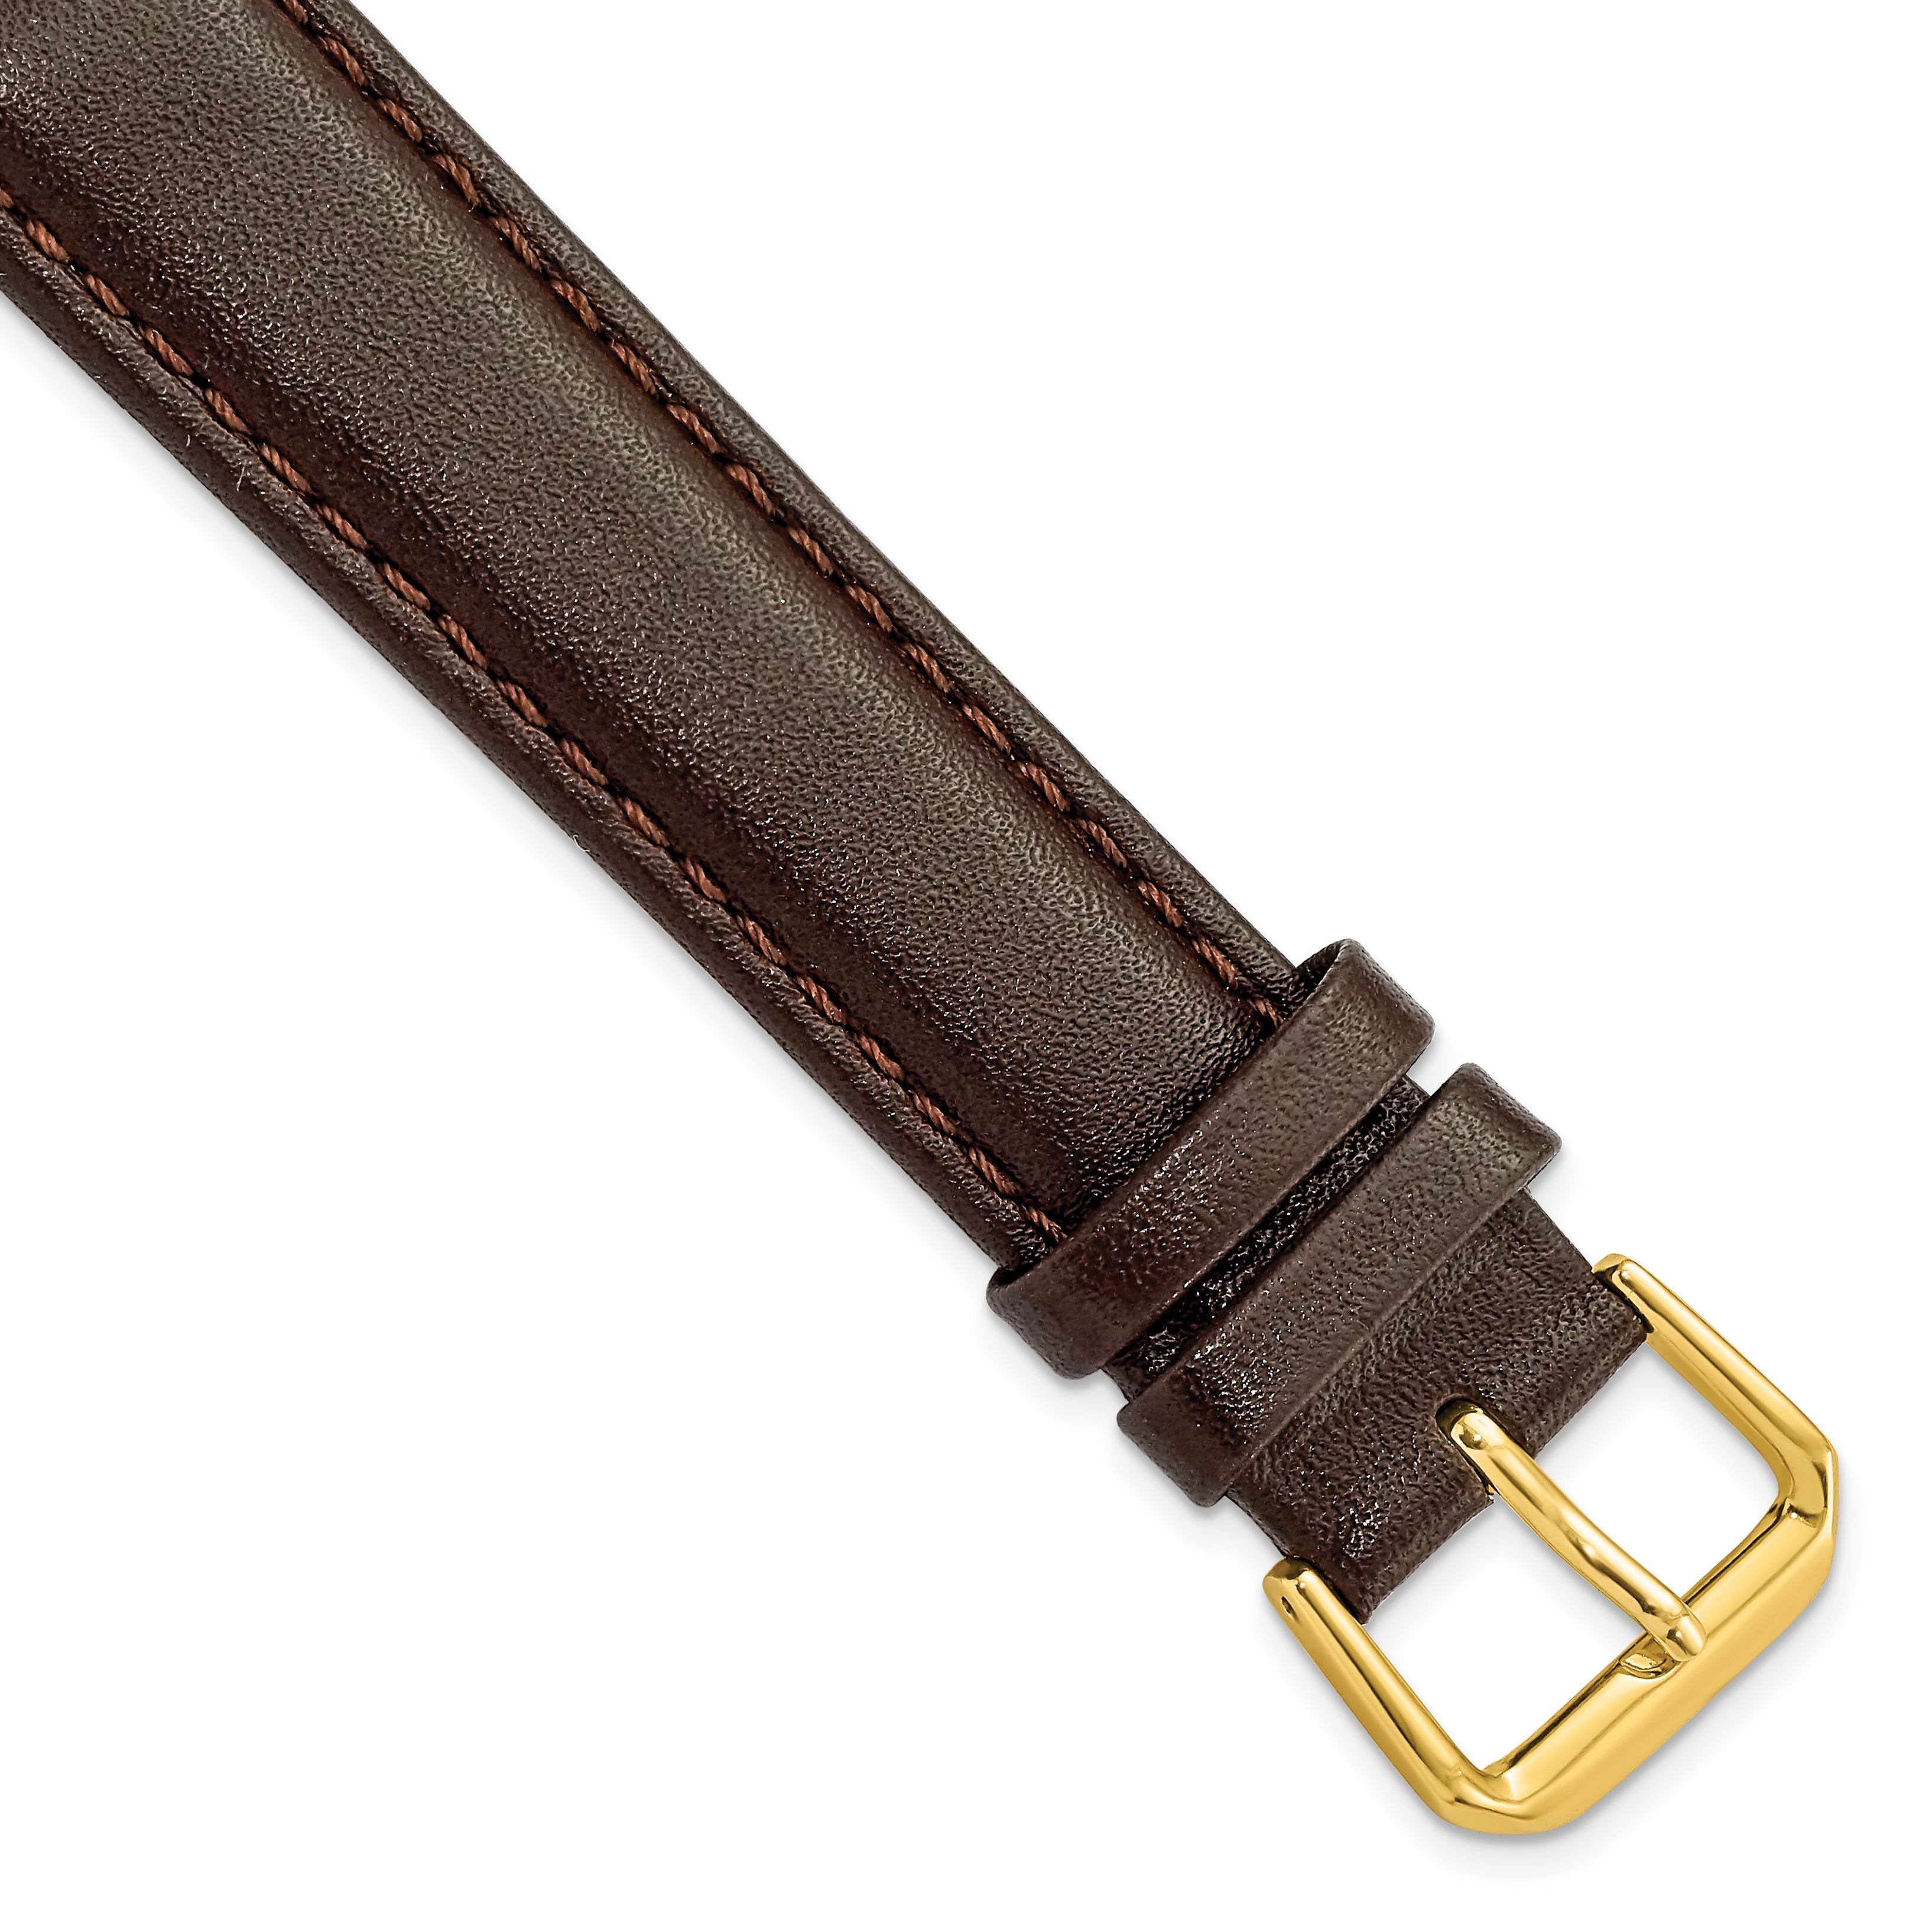 DeBeer 18mm Long Dark Brown Smooth Leather with Gold-tone Buckle 8.5 inch Watch Band